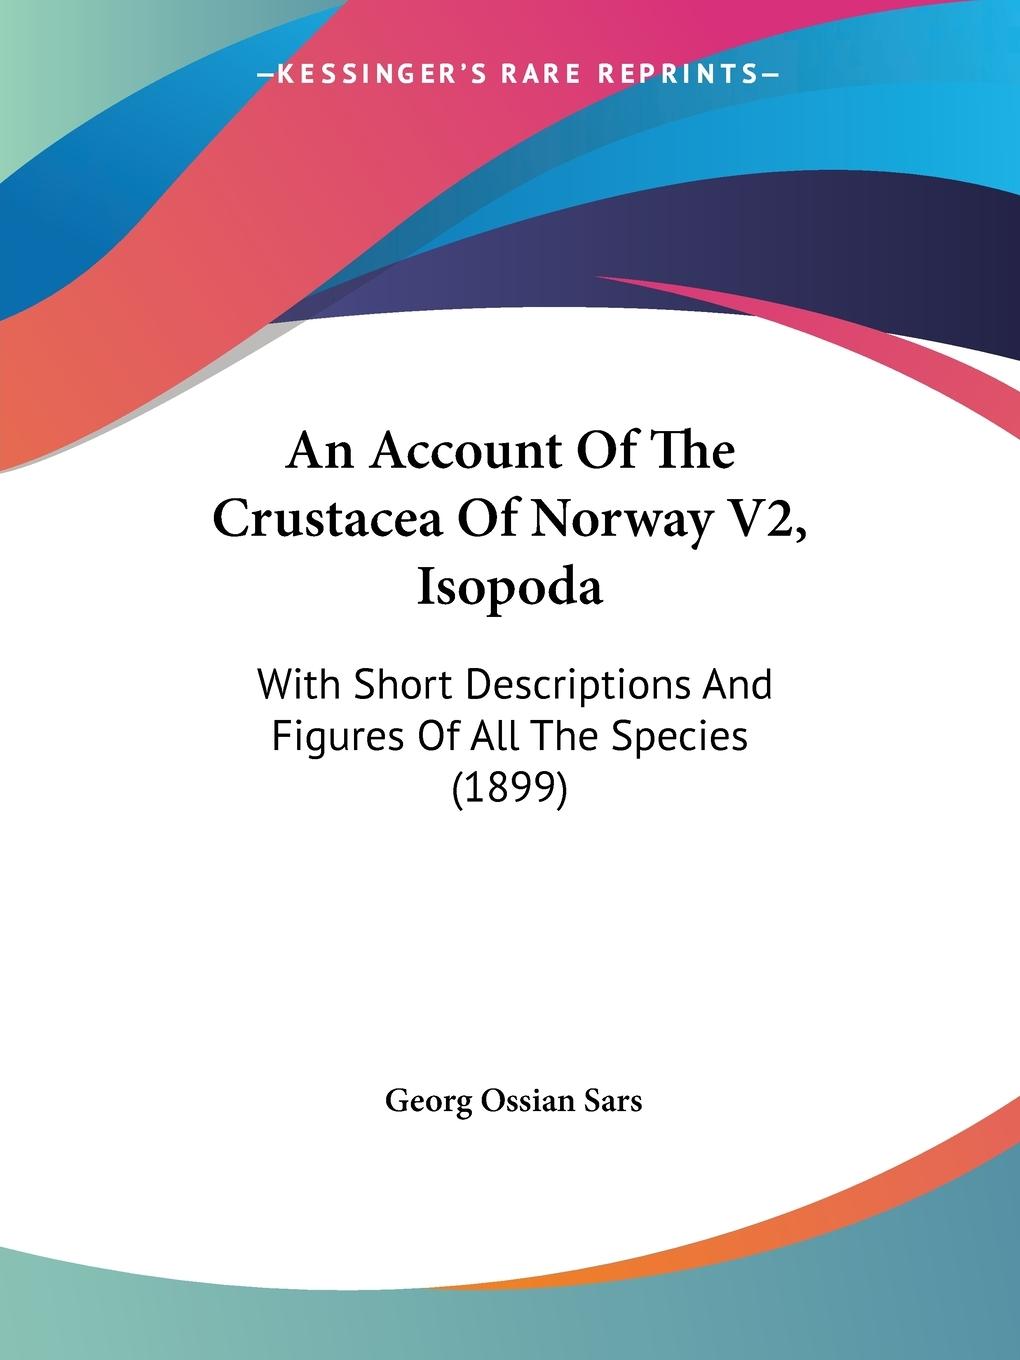 An Account Of The Crustacea Of Norway V2, Isopoda - Sars, Georg Ossian